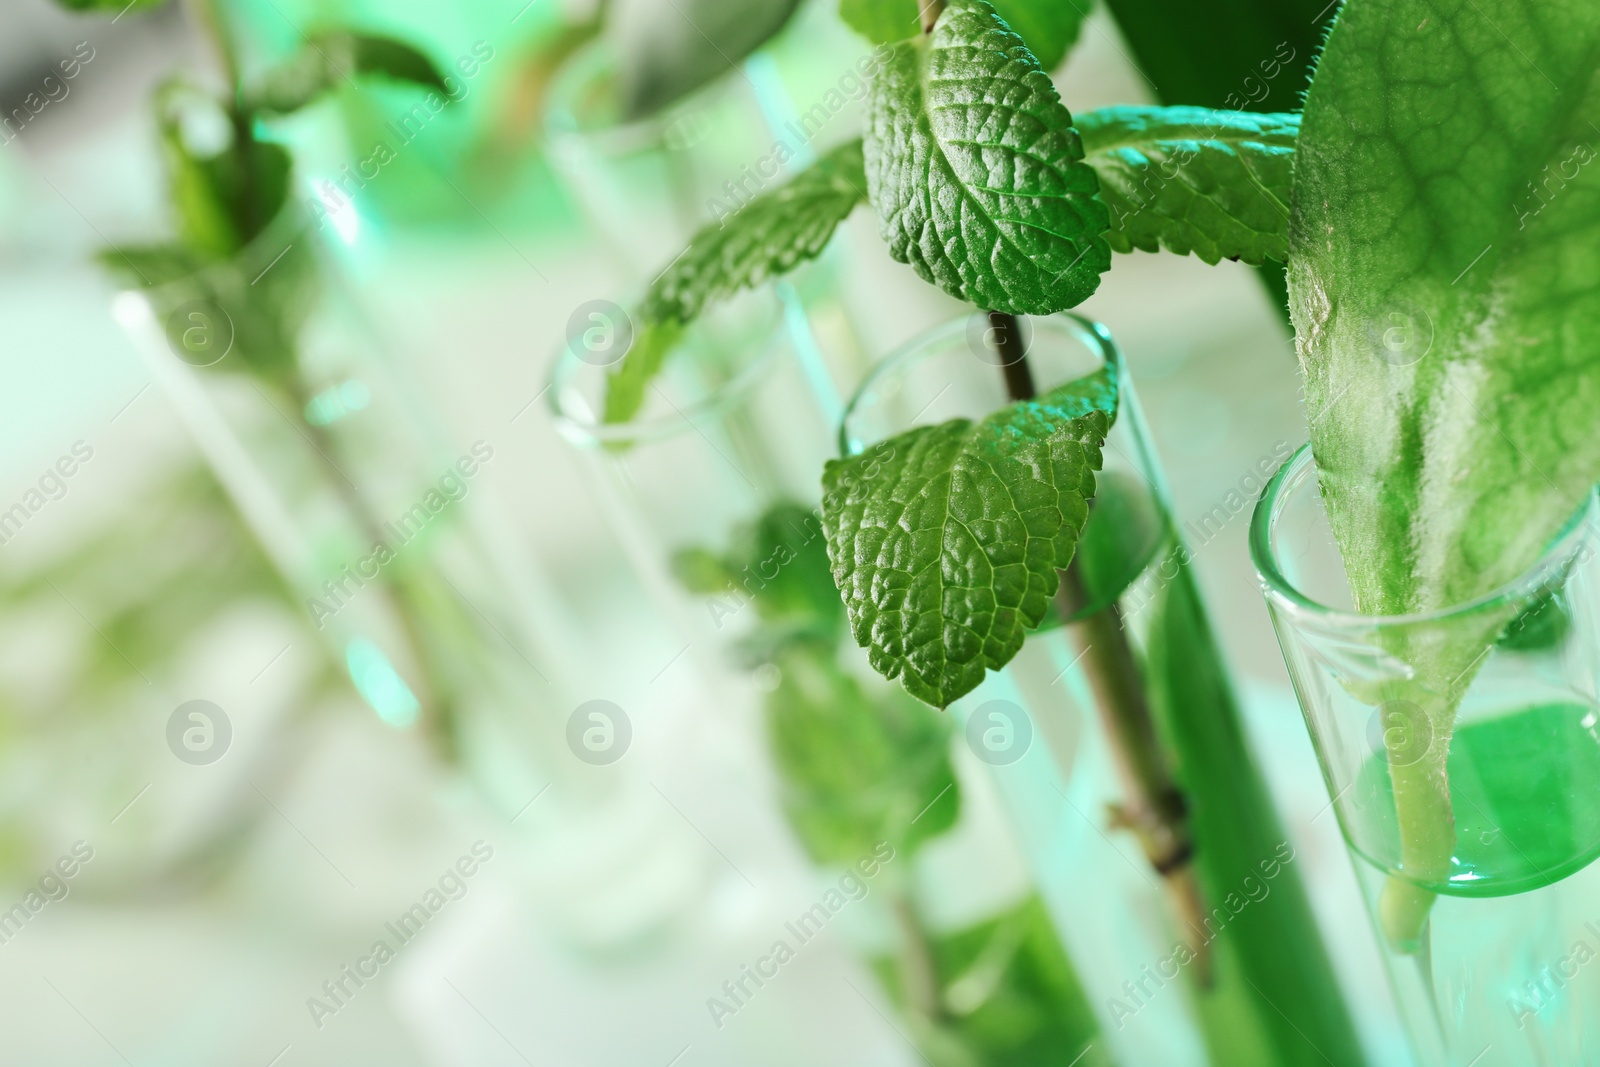 Photo of Green plants in test tubes on blurred background, closeup with space for text. Biological chemistry